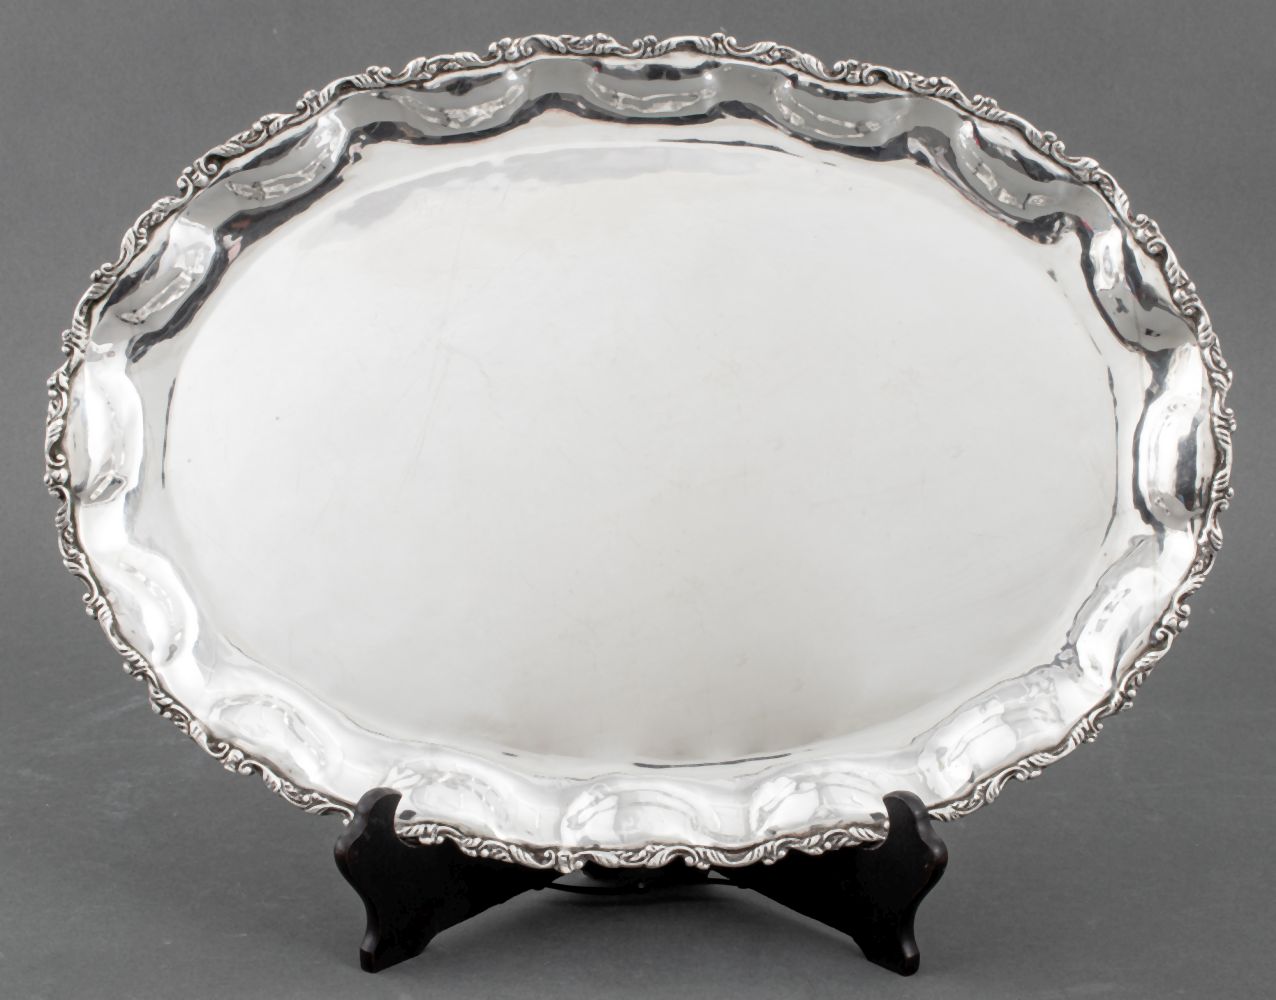 MEXICAN STERLING SILVER TRAY Mexican 2fb7e1